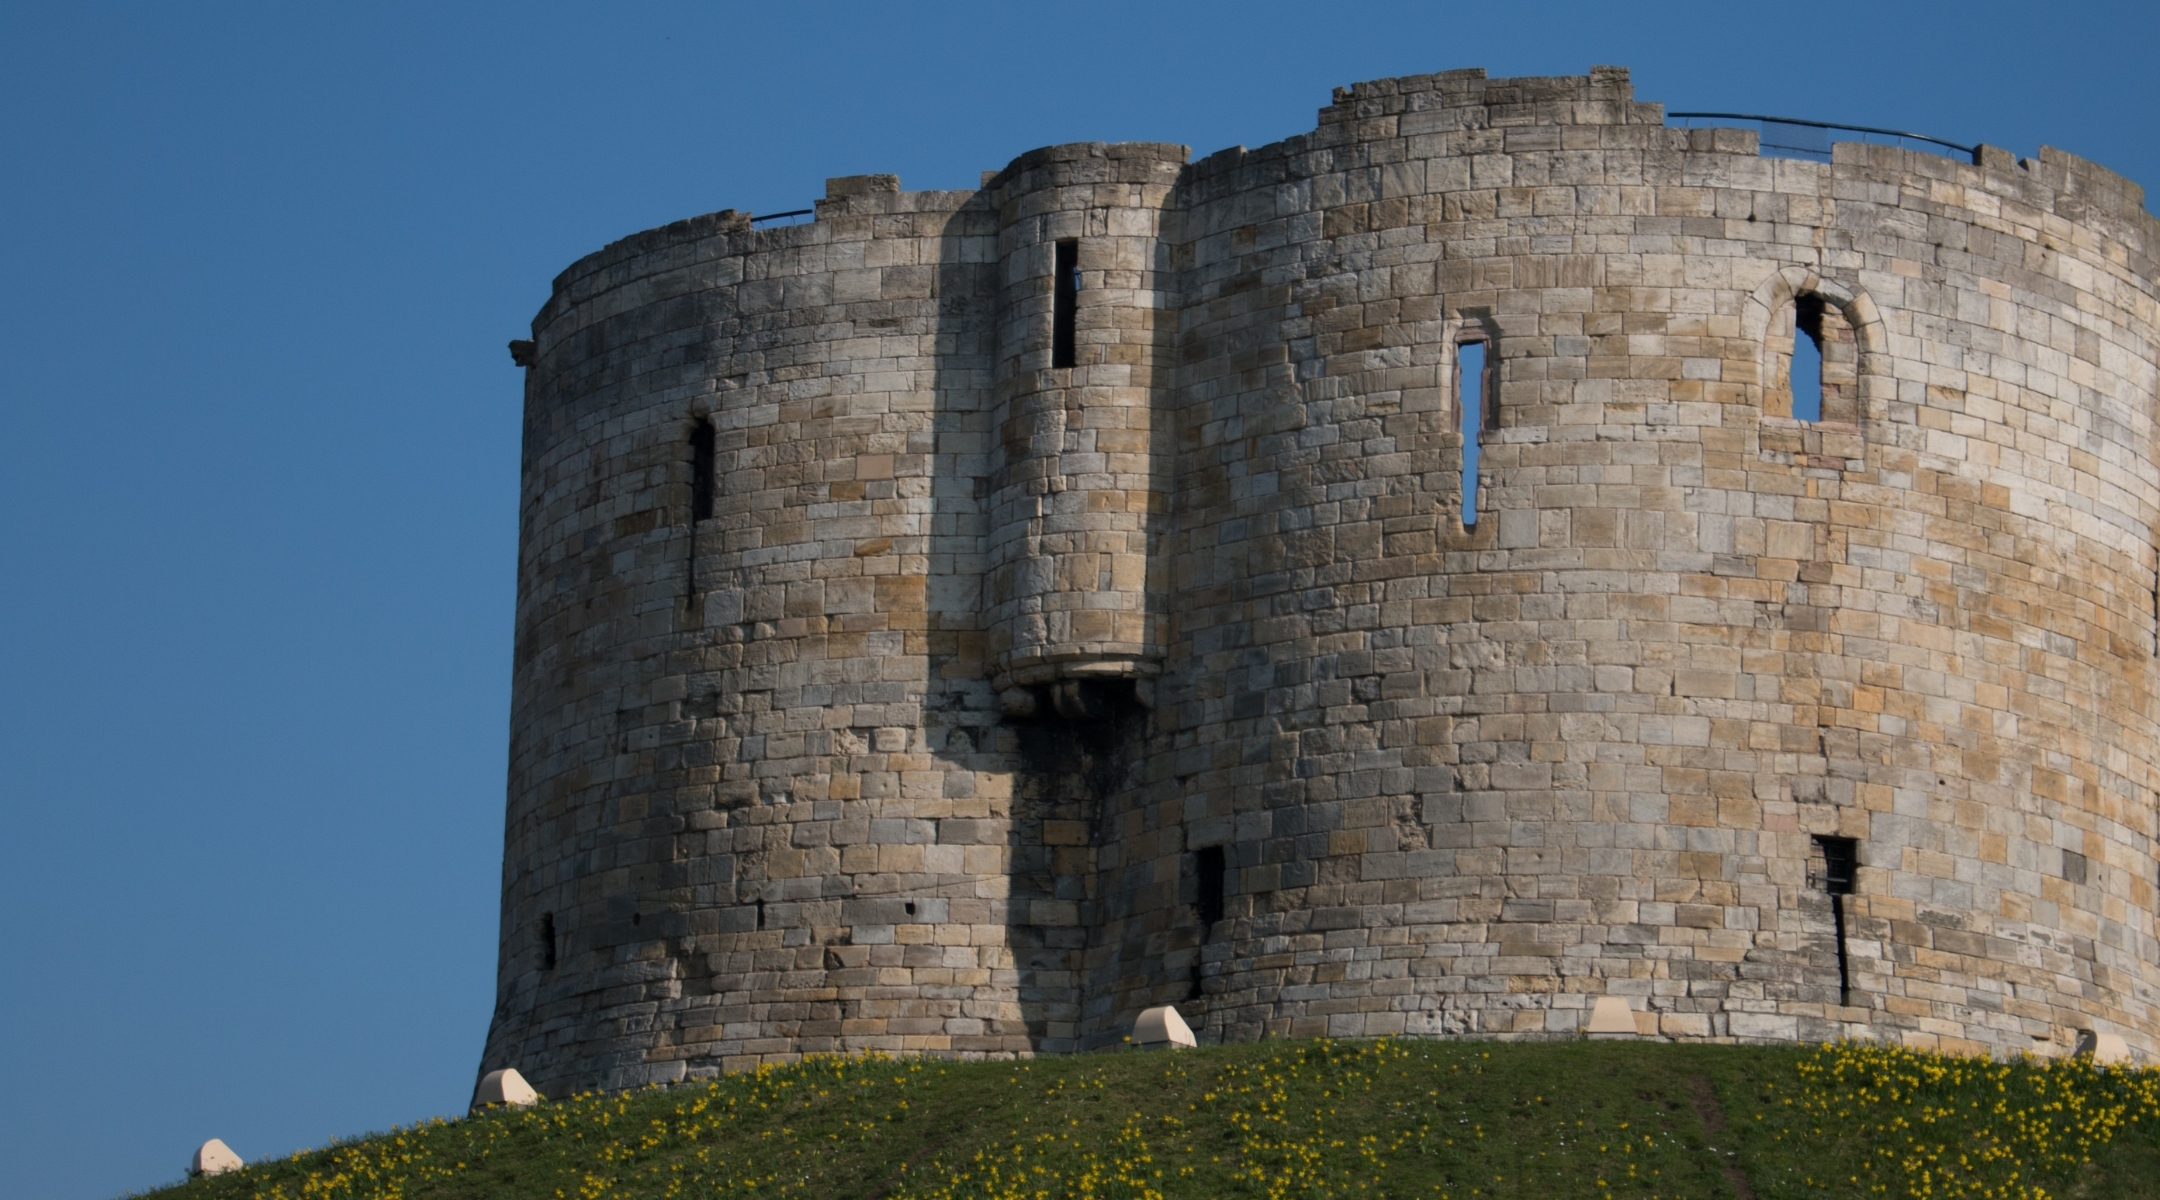 Clifford’s Tower, the site of the massacre of the Jews of York in 1190.